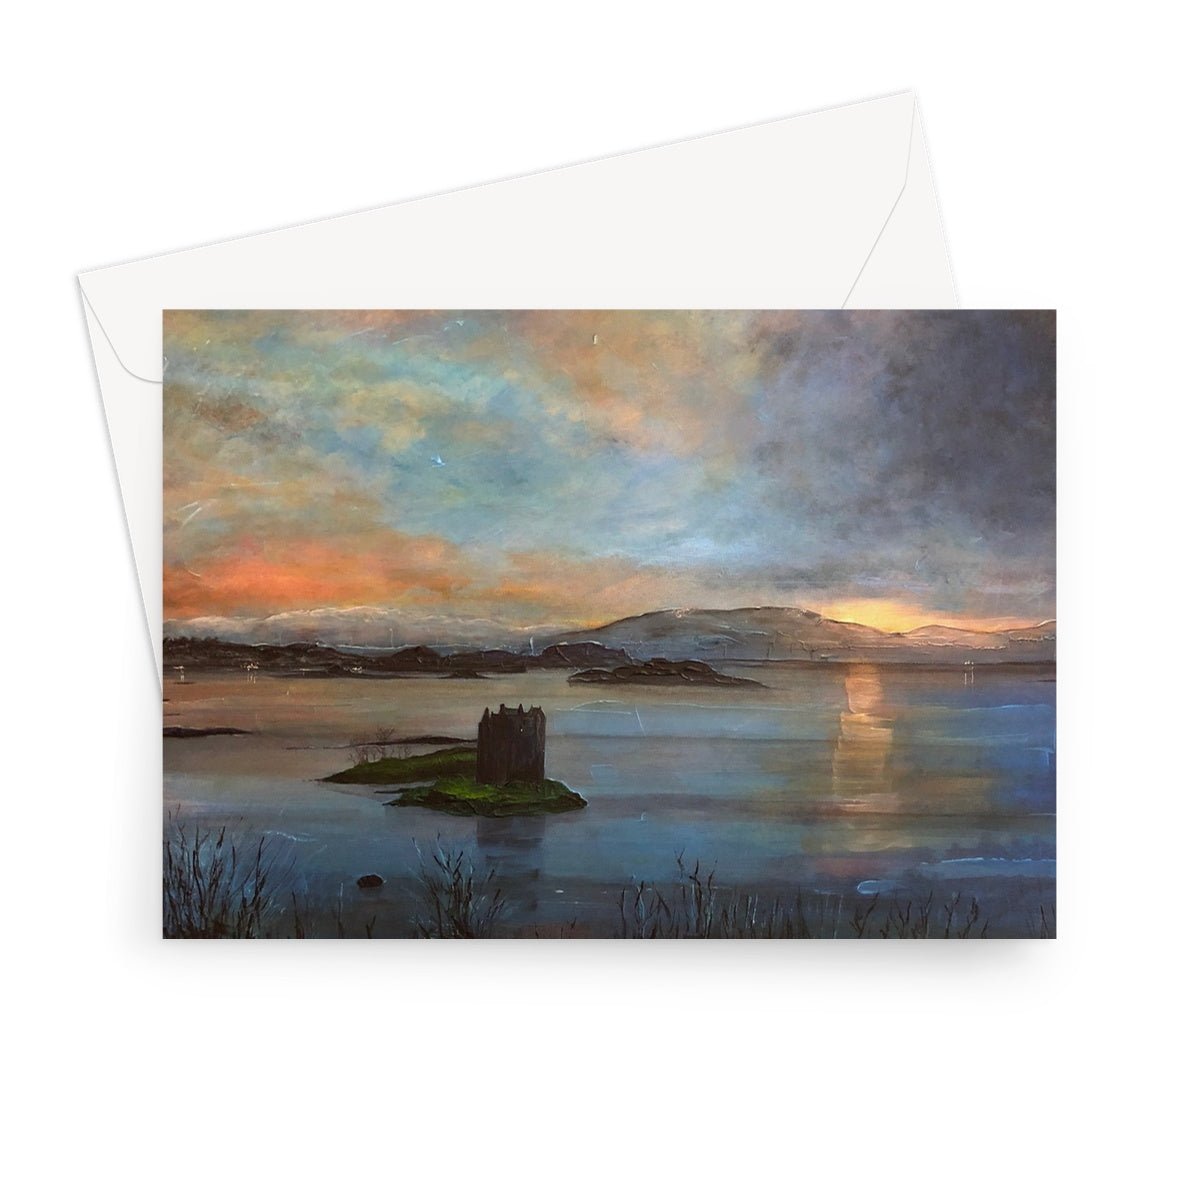 Castle Stalker Twilight Art Gifts Greeting Card-Greetings Cards-Historic & Iconic Scotland Art Gallery-7"x5"-10 Cards-Paintings, Prints, Homeware, Art Gifts From Scotland By Scottish Artist Kevin Hunter